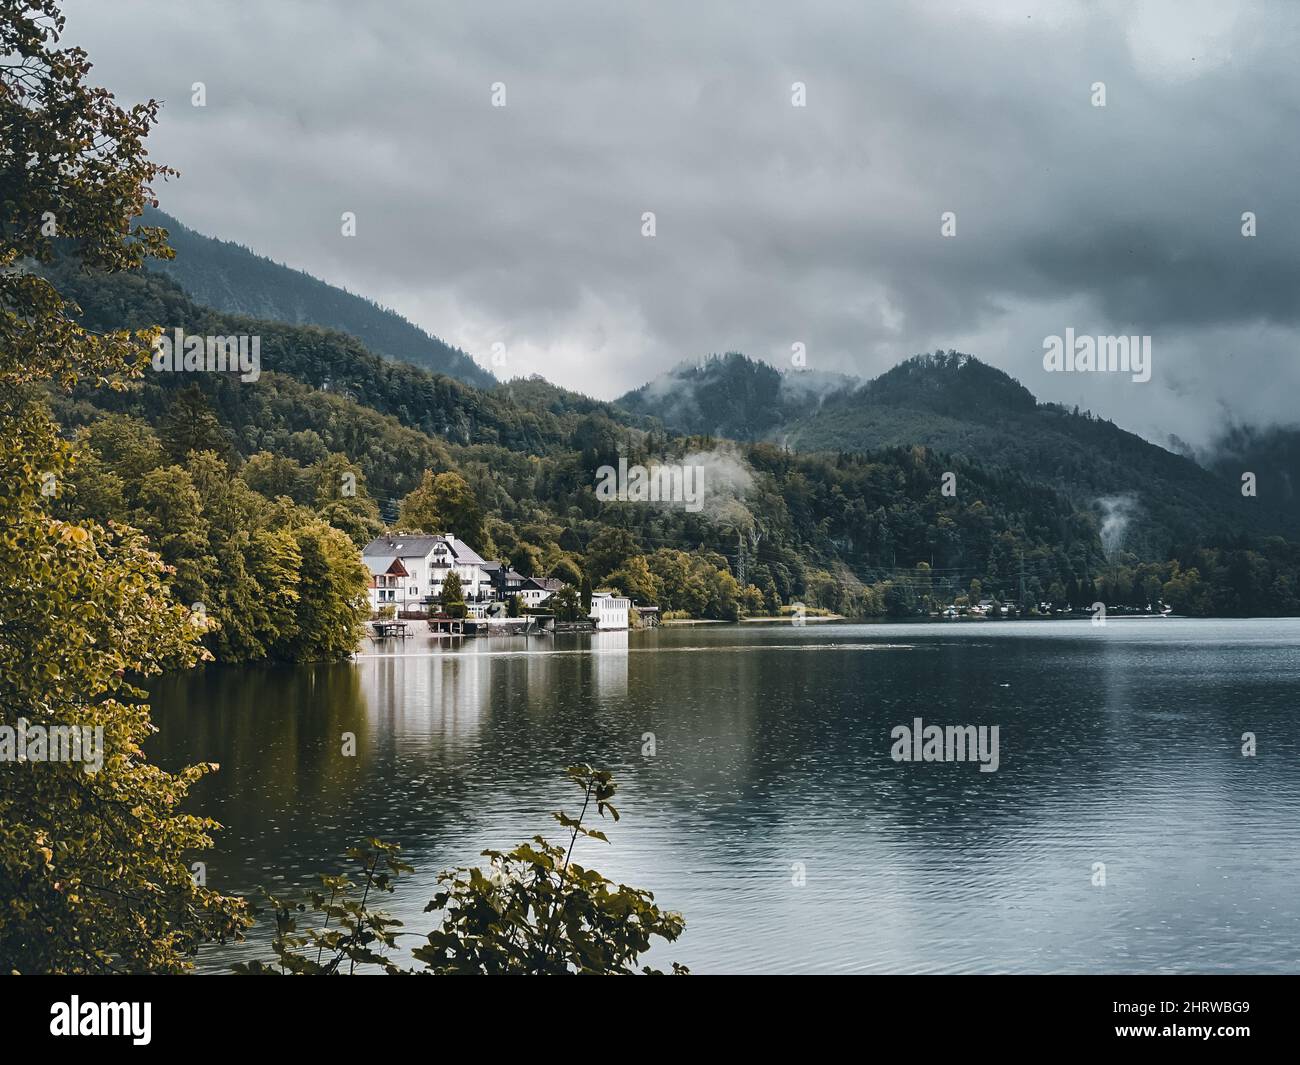 House surrounded by a beautiful lake and trees under a gray cloudy sky in Geretsried Stock Photo